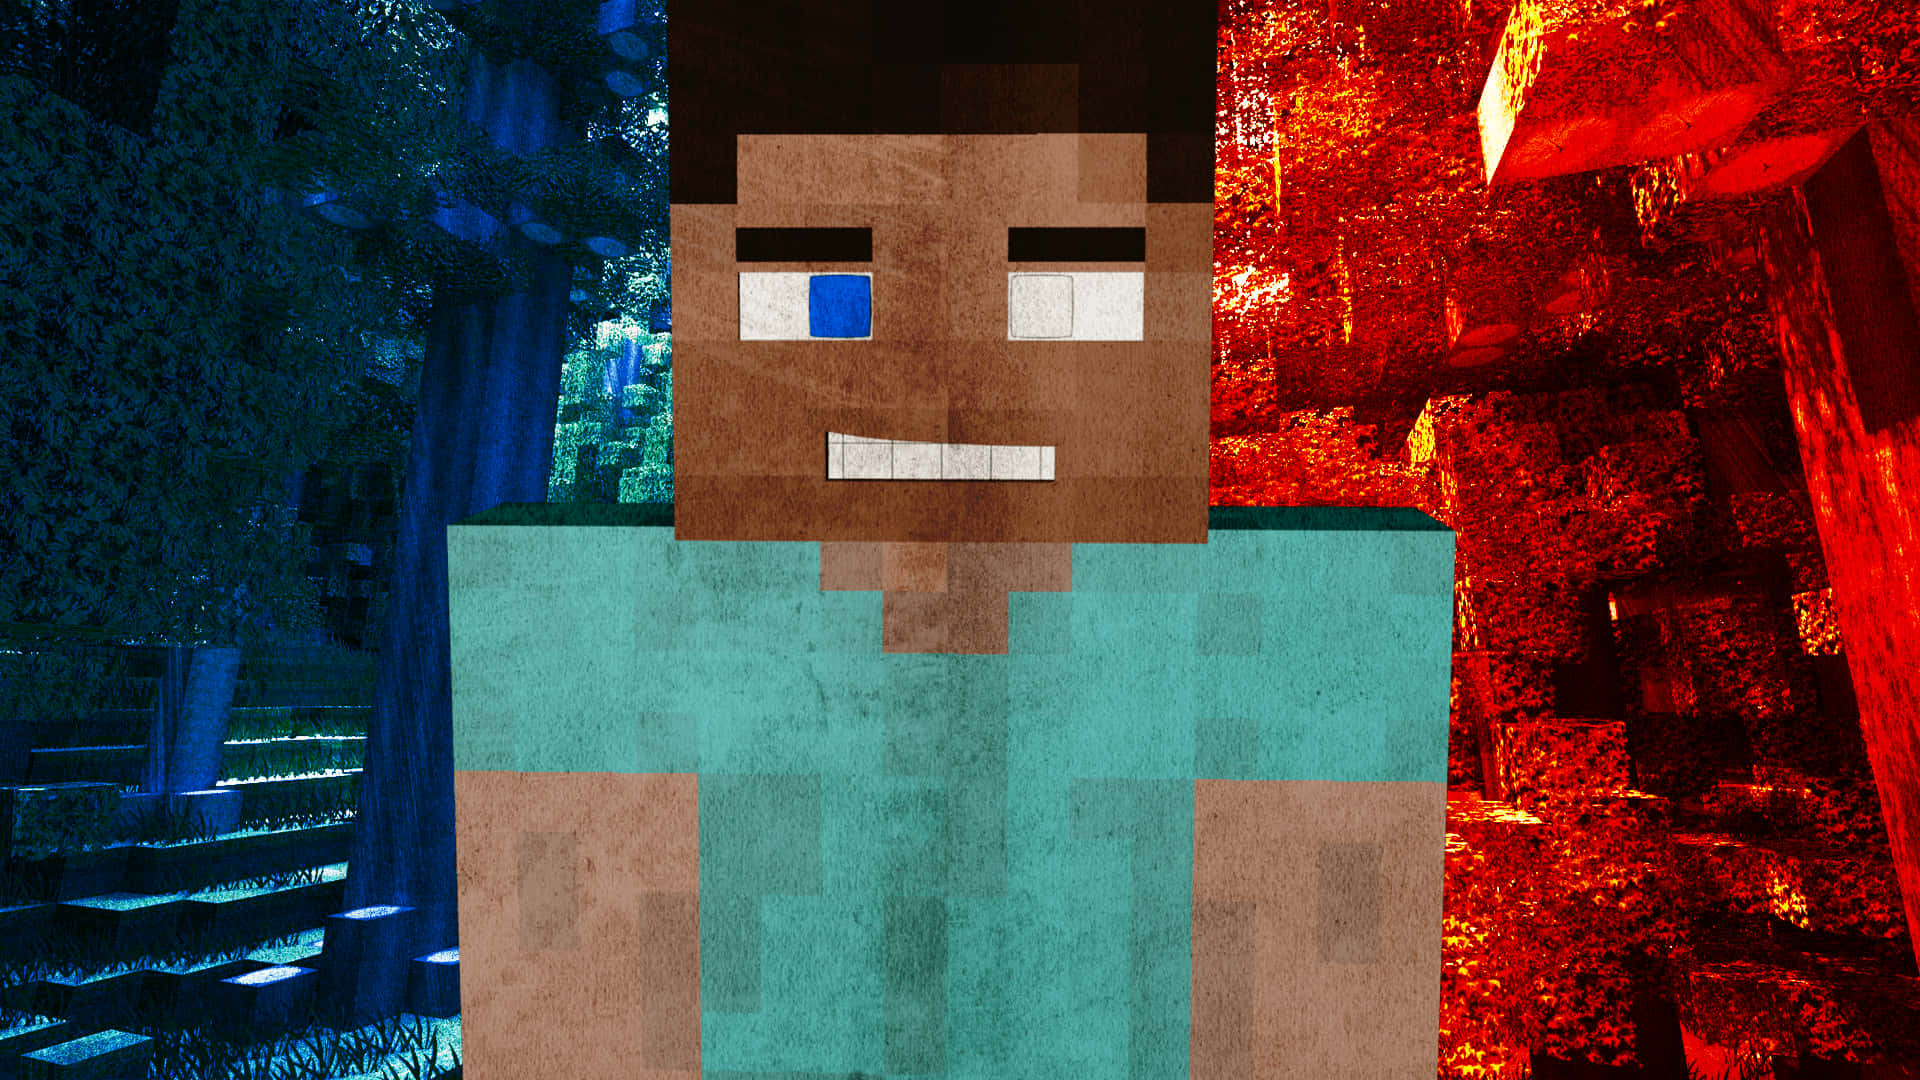 Herobrine - The Mythical Minecraft Character